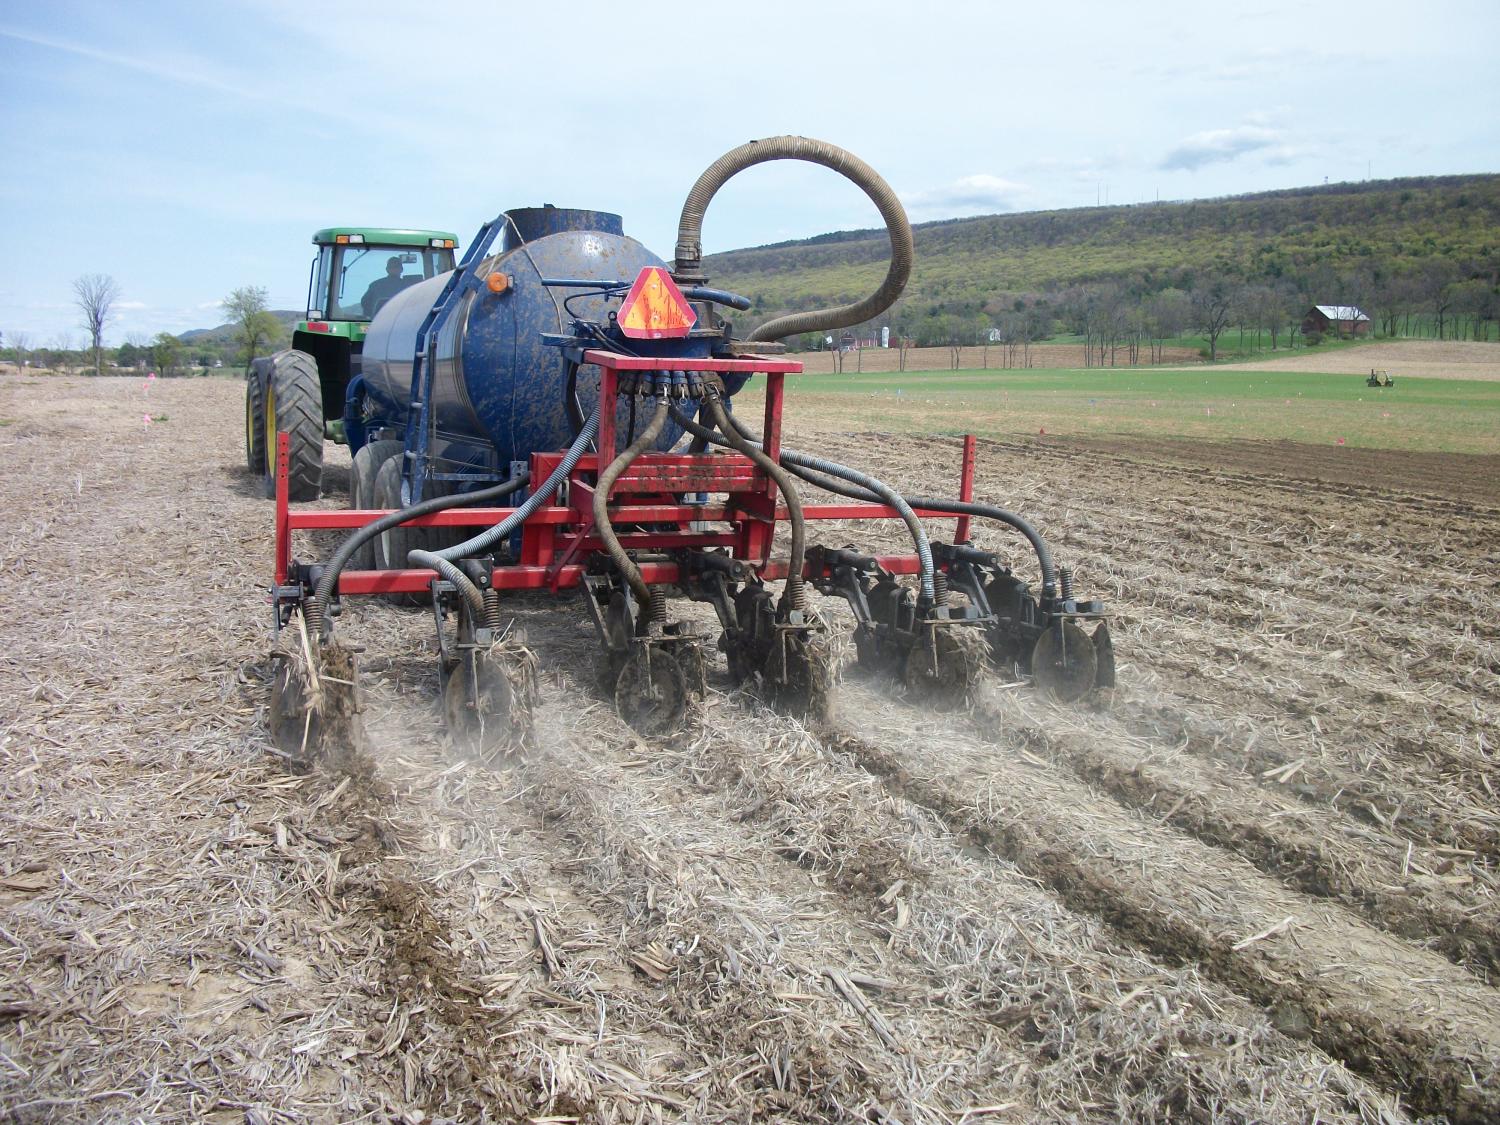 Dairy farms — especially in the Northeast — are increasingly subject to more stringent regulations to reduce nutrient losses. With expected warmer conditions that will result in increased ammonia volatilization from manure and more frequent and more severe storms that will cause more soluble phosphorus runoff, new strategies such as manure injection (shown) are needed to limit nitrogen and phosphorus losses from crop fields. Credit: Robert Meinen. All Rights Reserved.